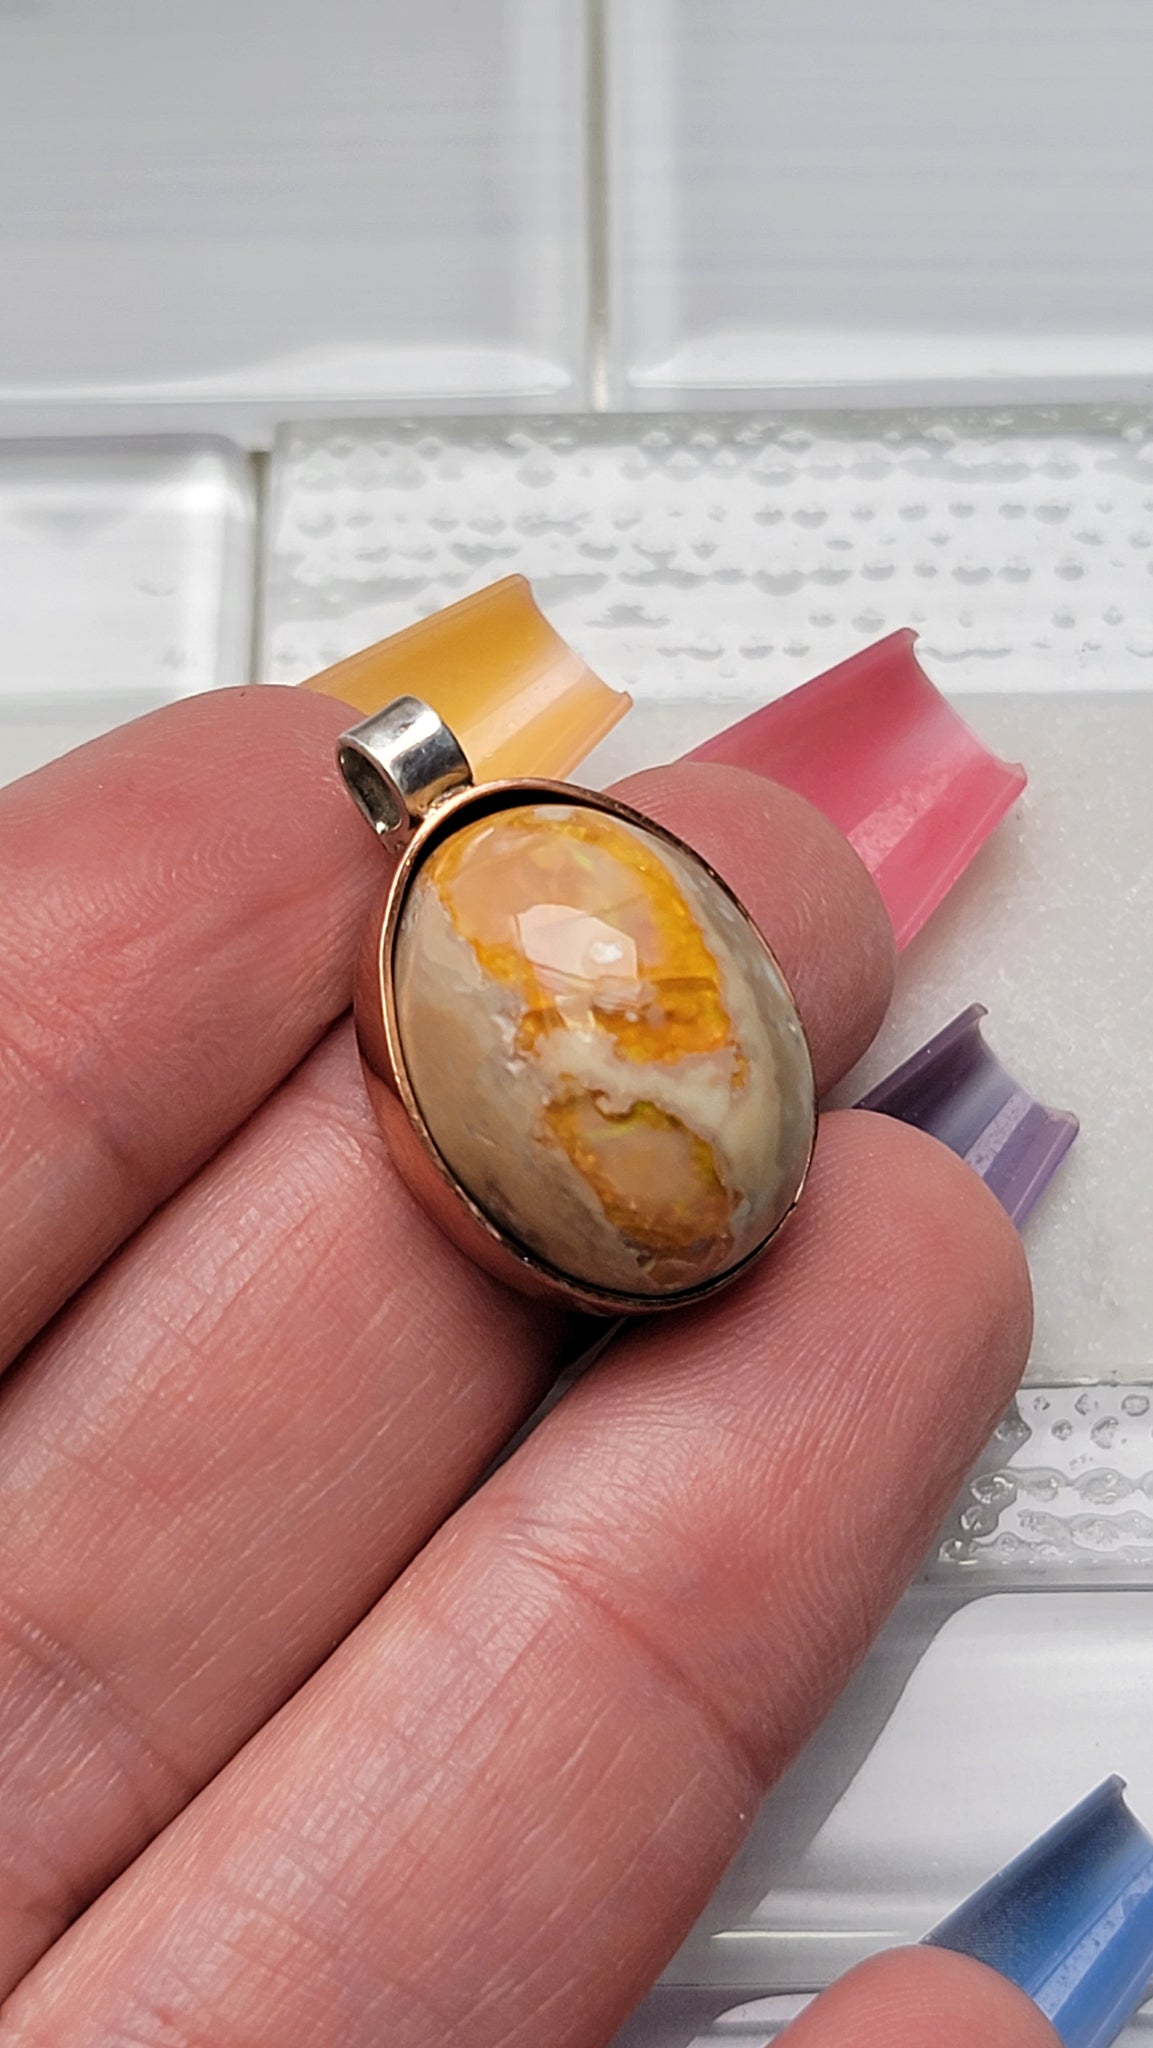 Natural Cantera Mexican Yellow Opal Sterling Silver &amp; Copper Pendant - AA Grade Opal